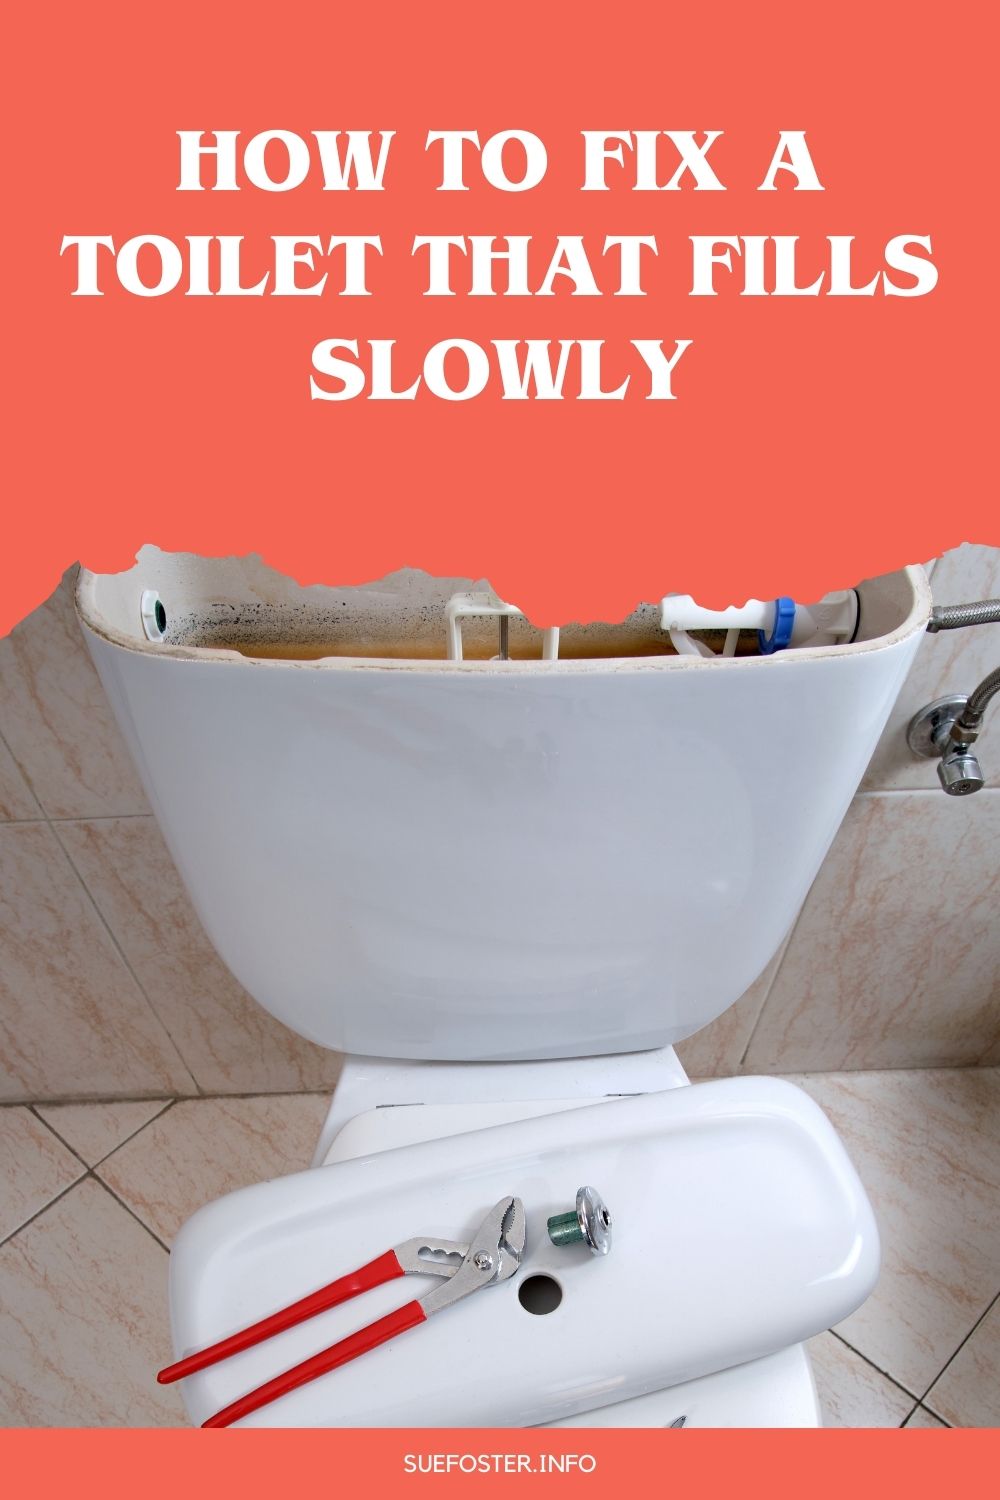 How to fix a slow-filling toilet with a Siamp Diaphragm. Save time & money with this easy DIY solution. Watch the helpful video tutorial I discovered.